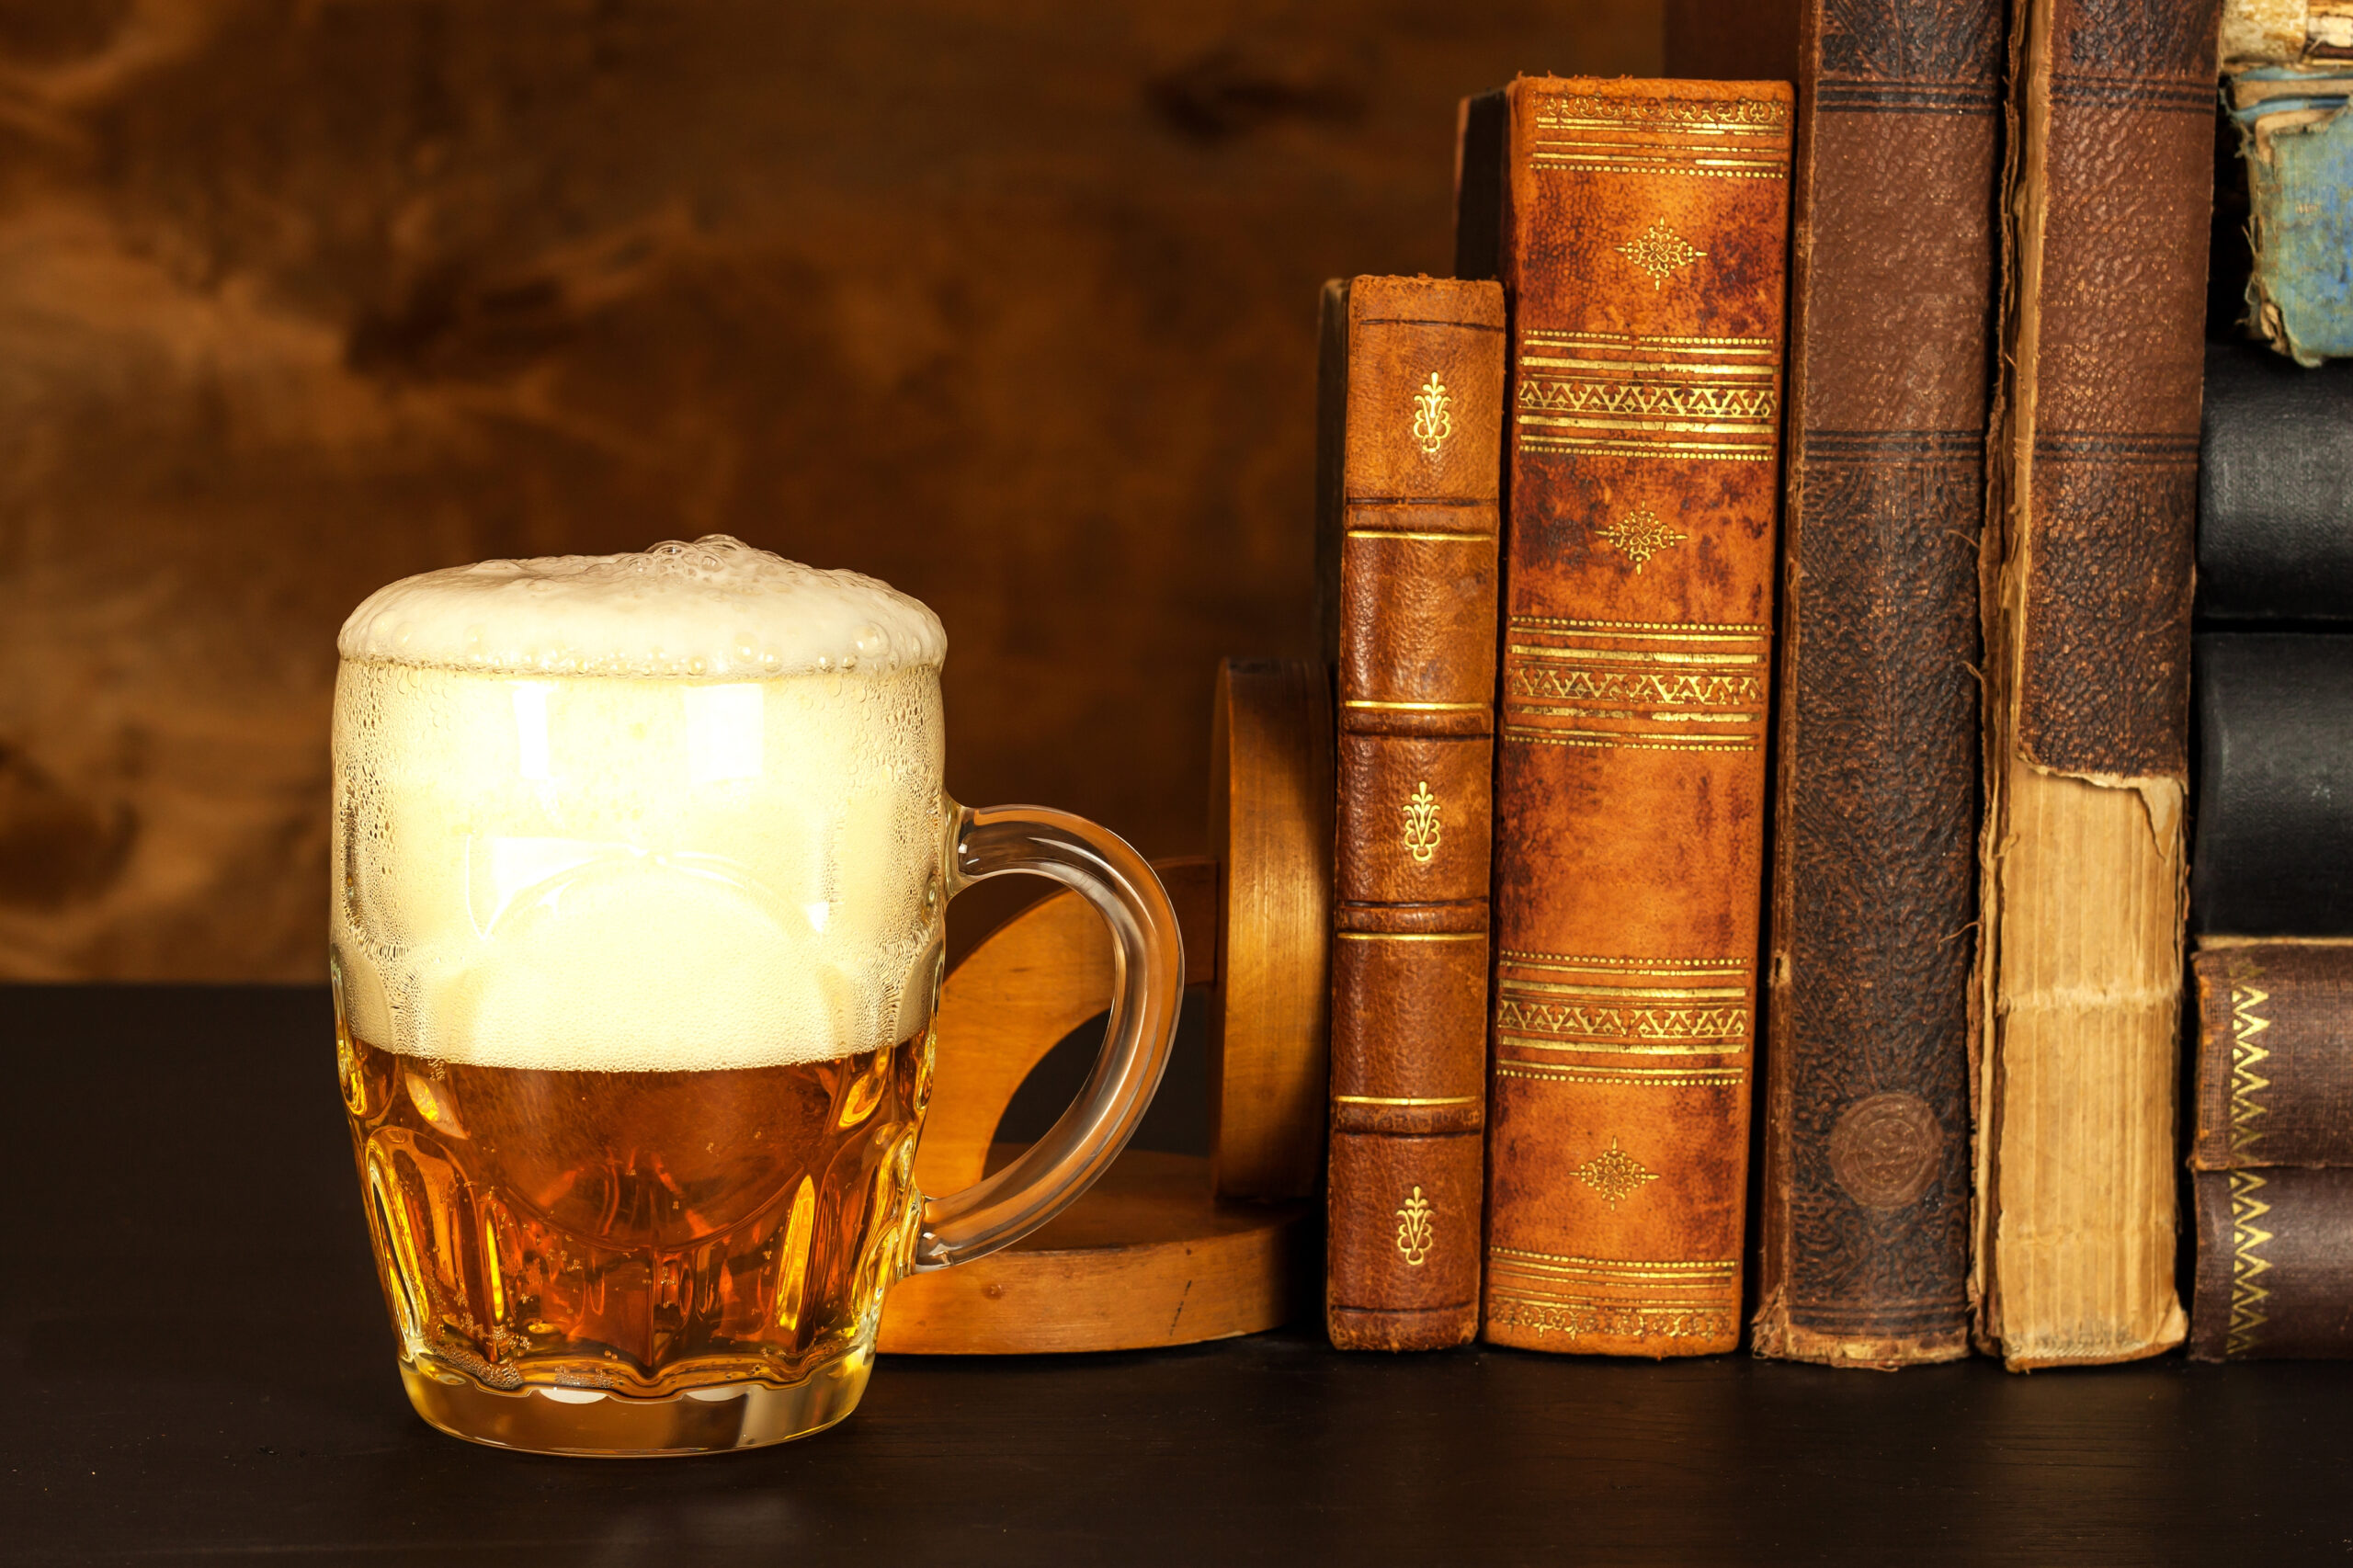 This San Francisco Bookstore Is Throwing a Keg Party, and Everyone Is Invited